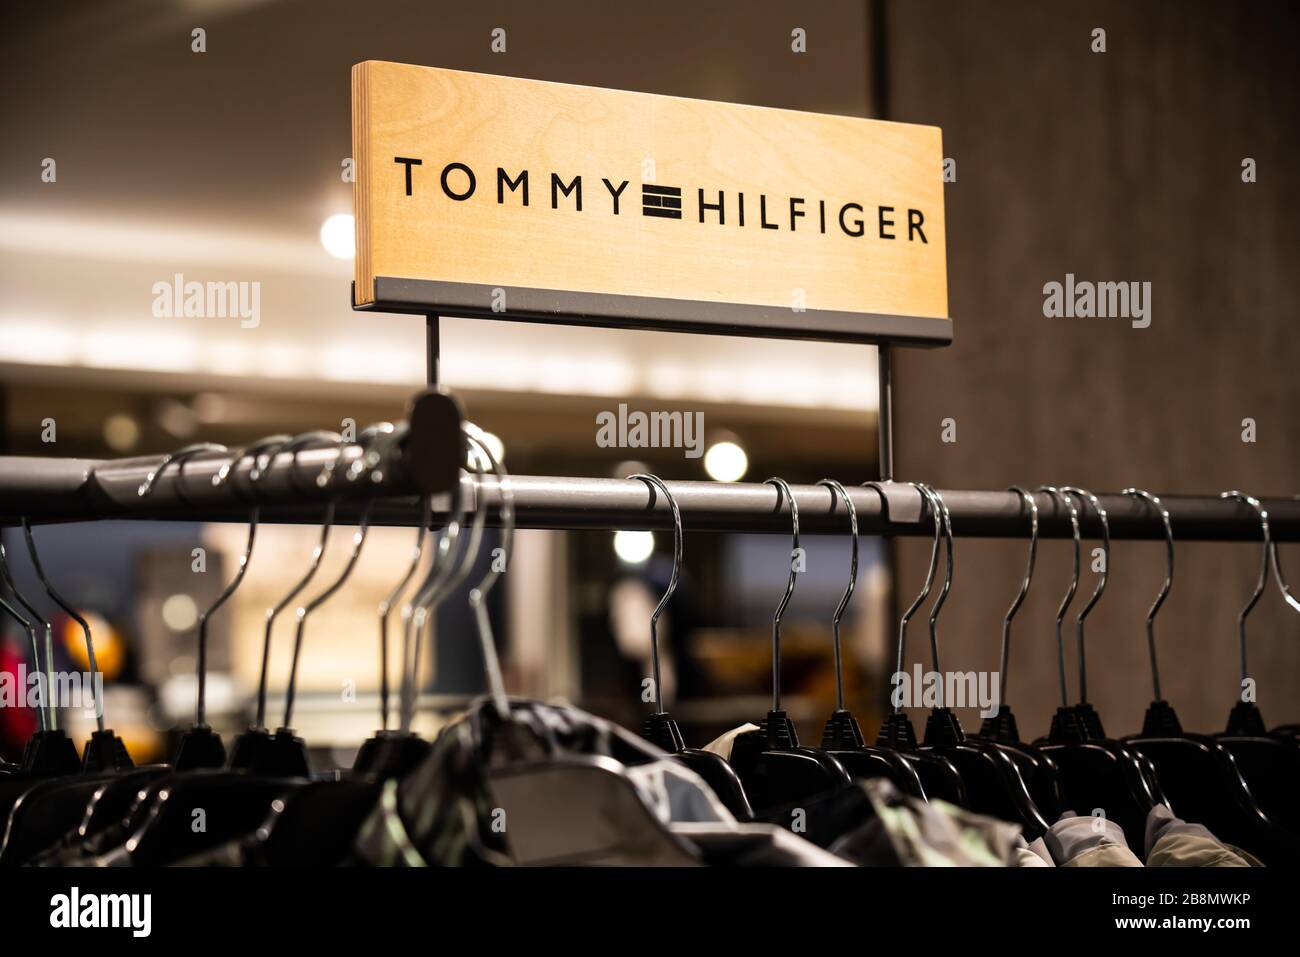 tommy hilfiger manufacturing country